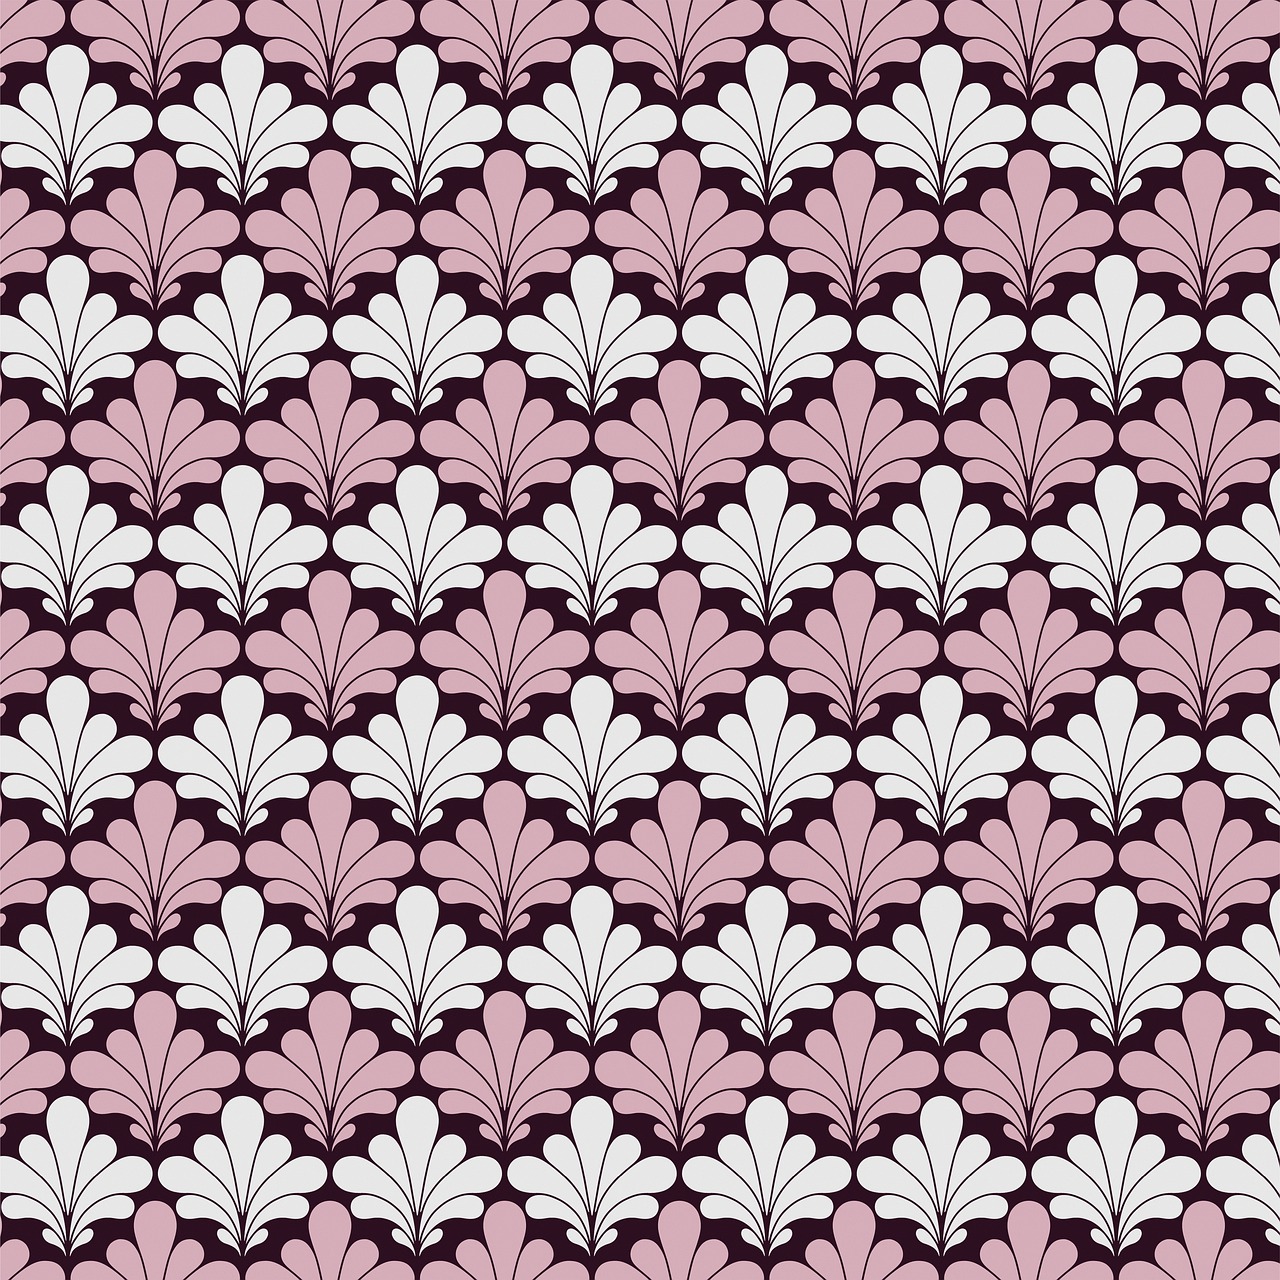 a pattern of white and pink flowers on a purple background, art nouveau, bargello pattern, style of masami kurumada, plume made of geometry, 3 colour